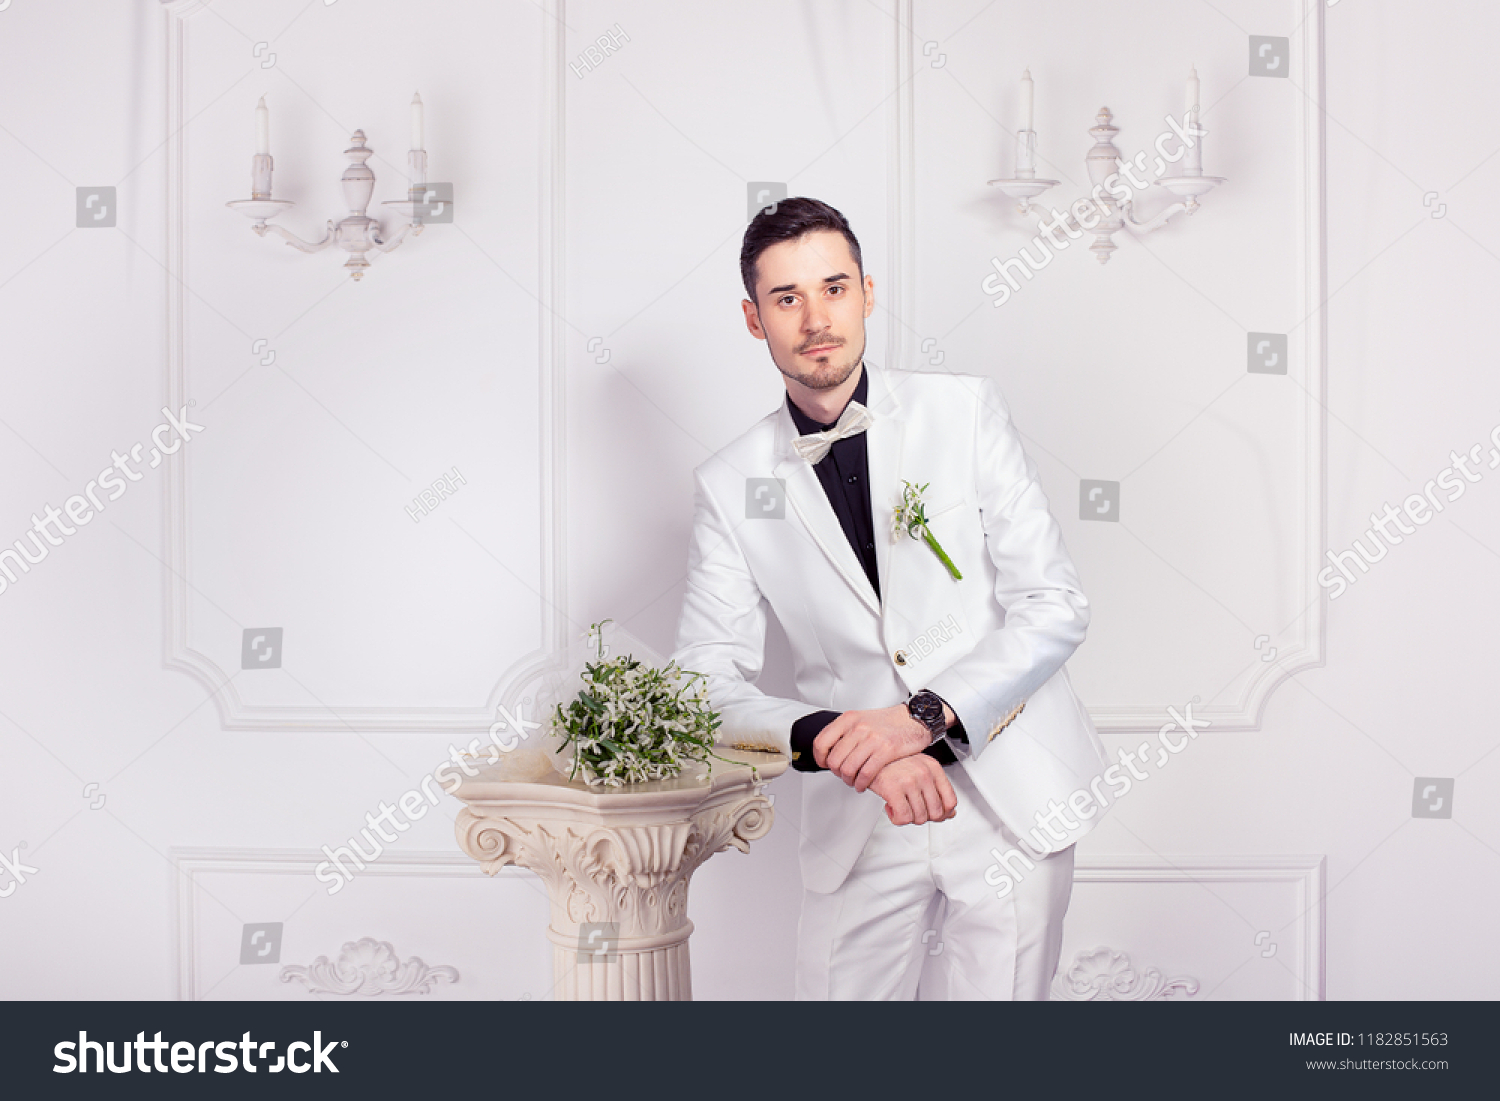 white suit with black shoes